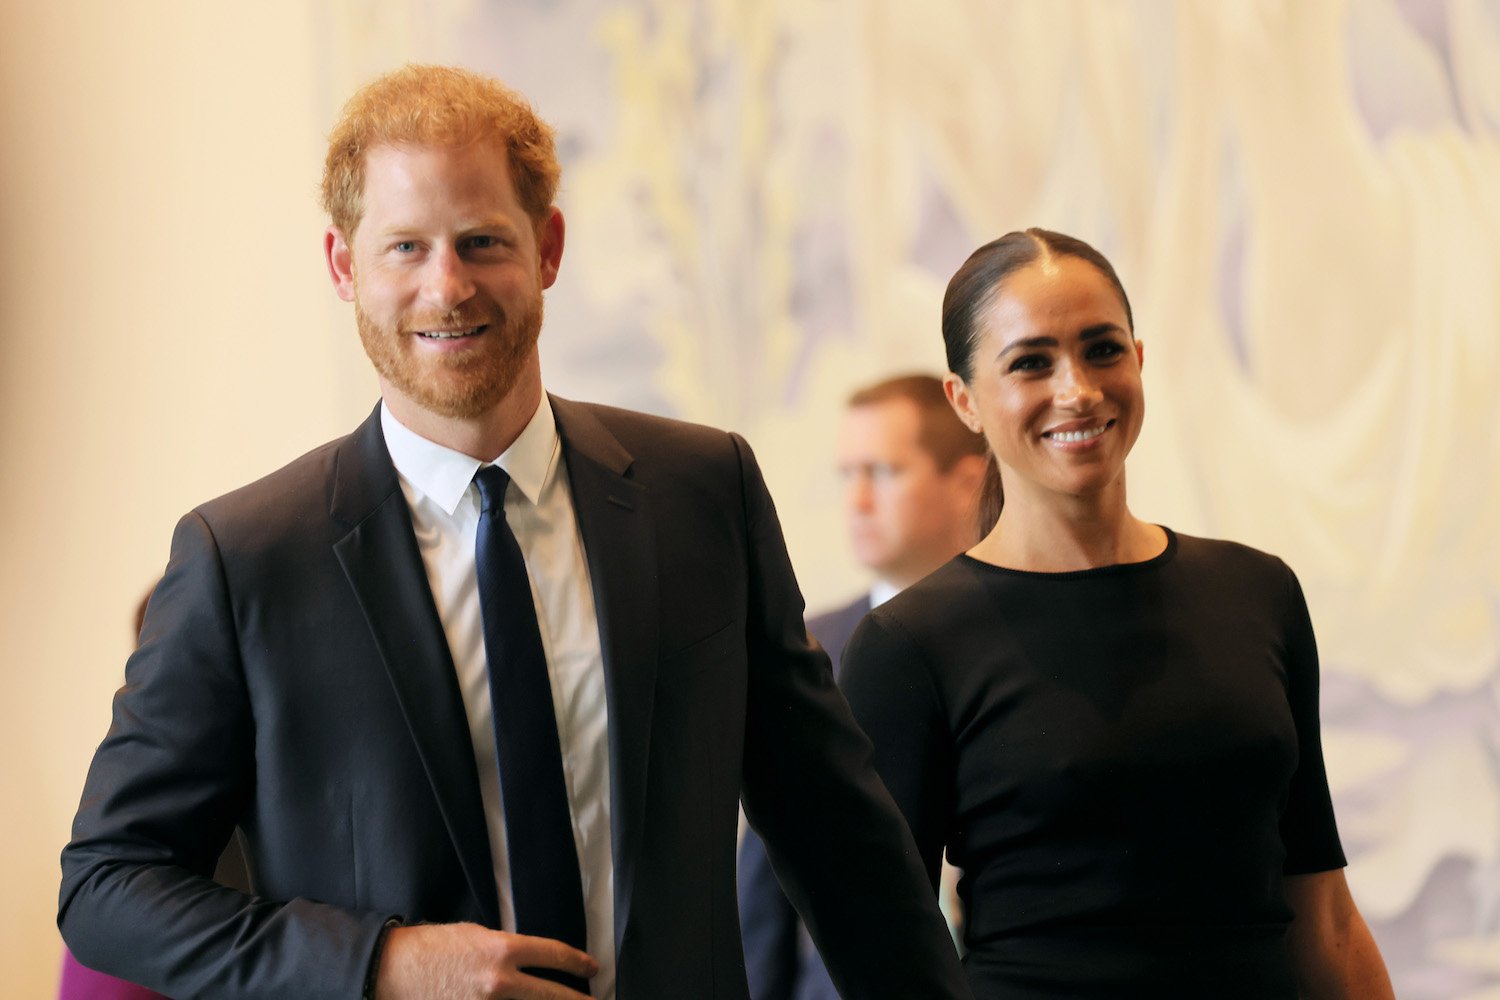 Prince Harry and Meghan Markle body language analyzed at Harry's UN speech as the two arrive smiling